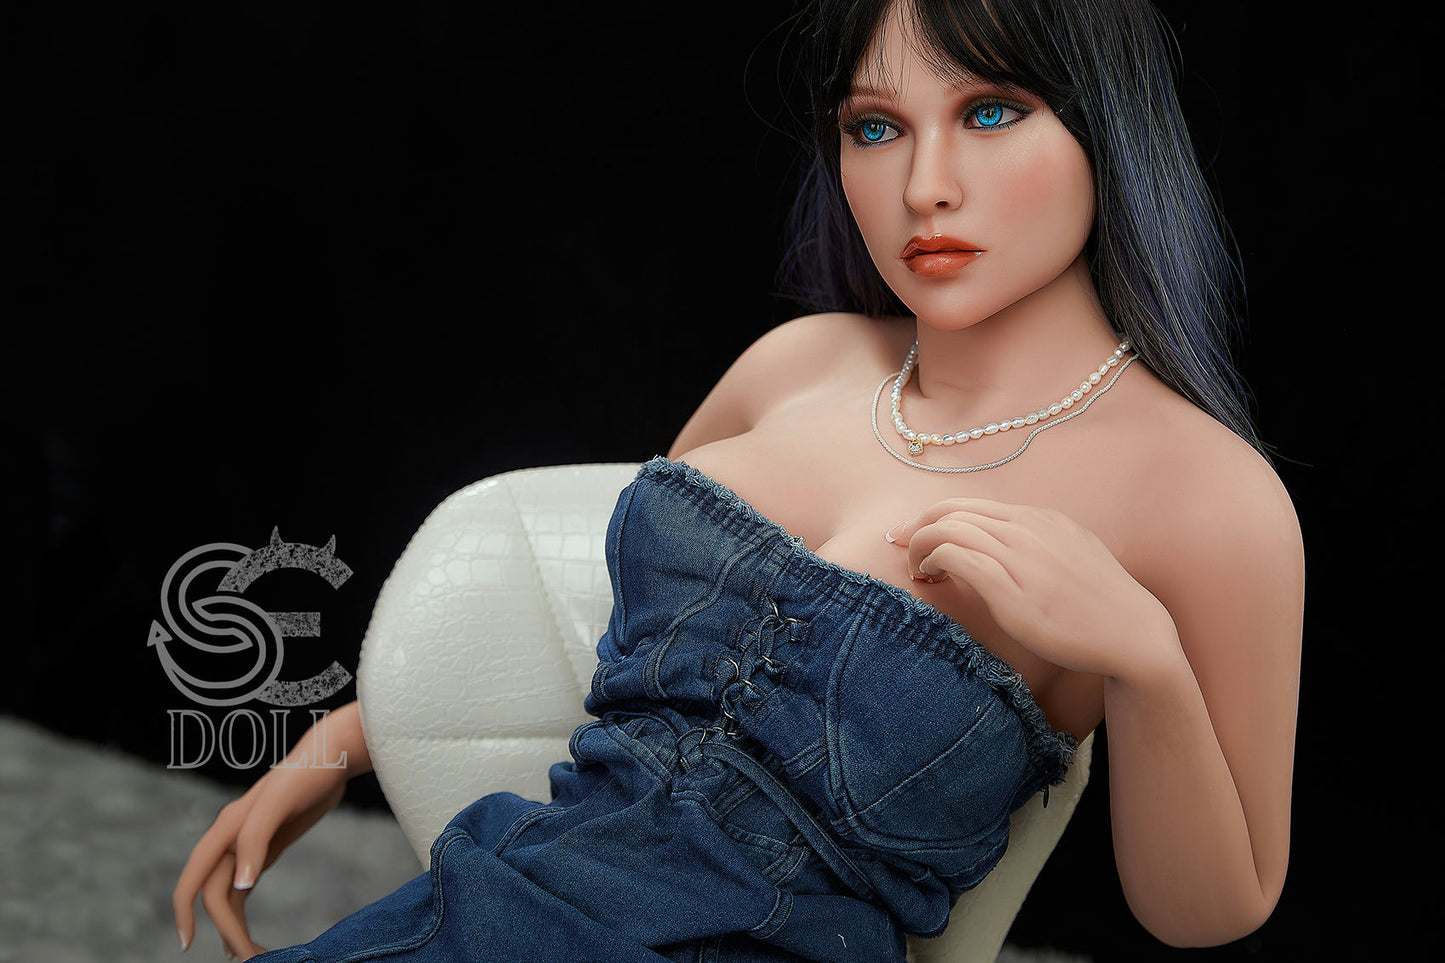 SE Doll 158cm D Cup - Evelyn